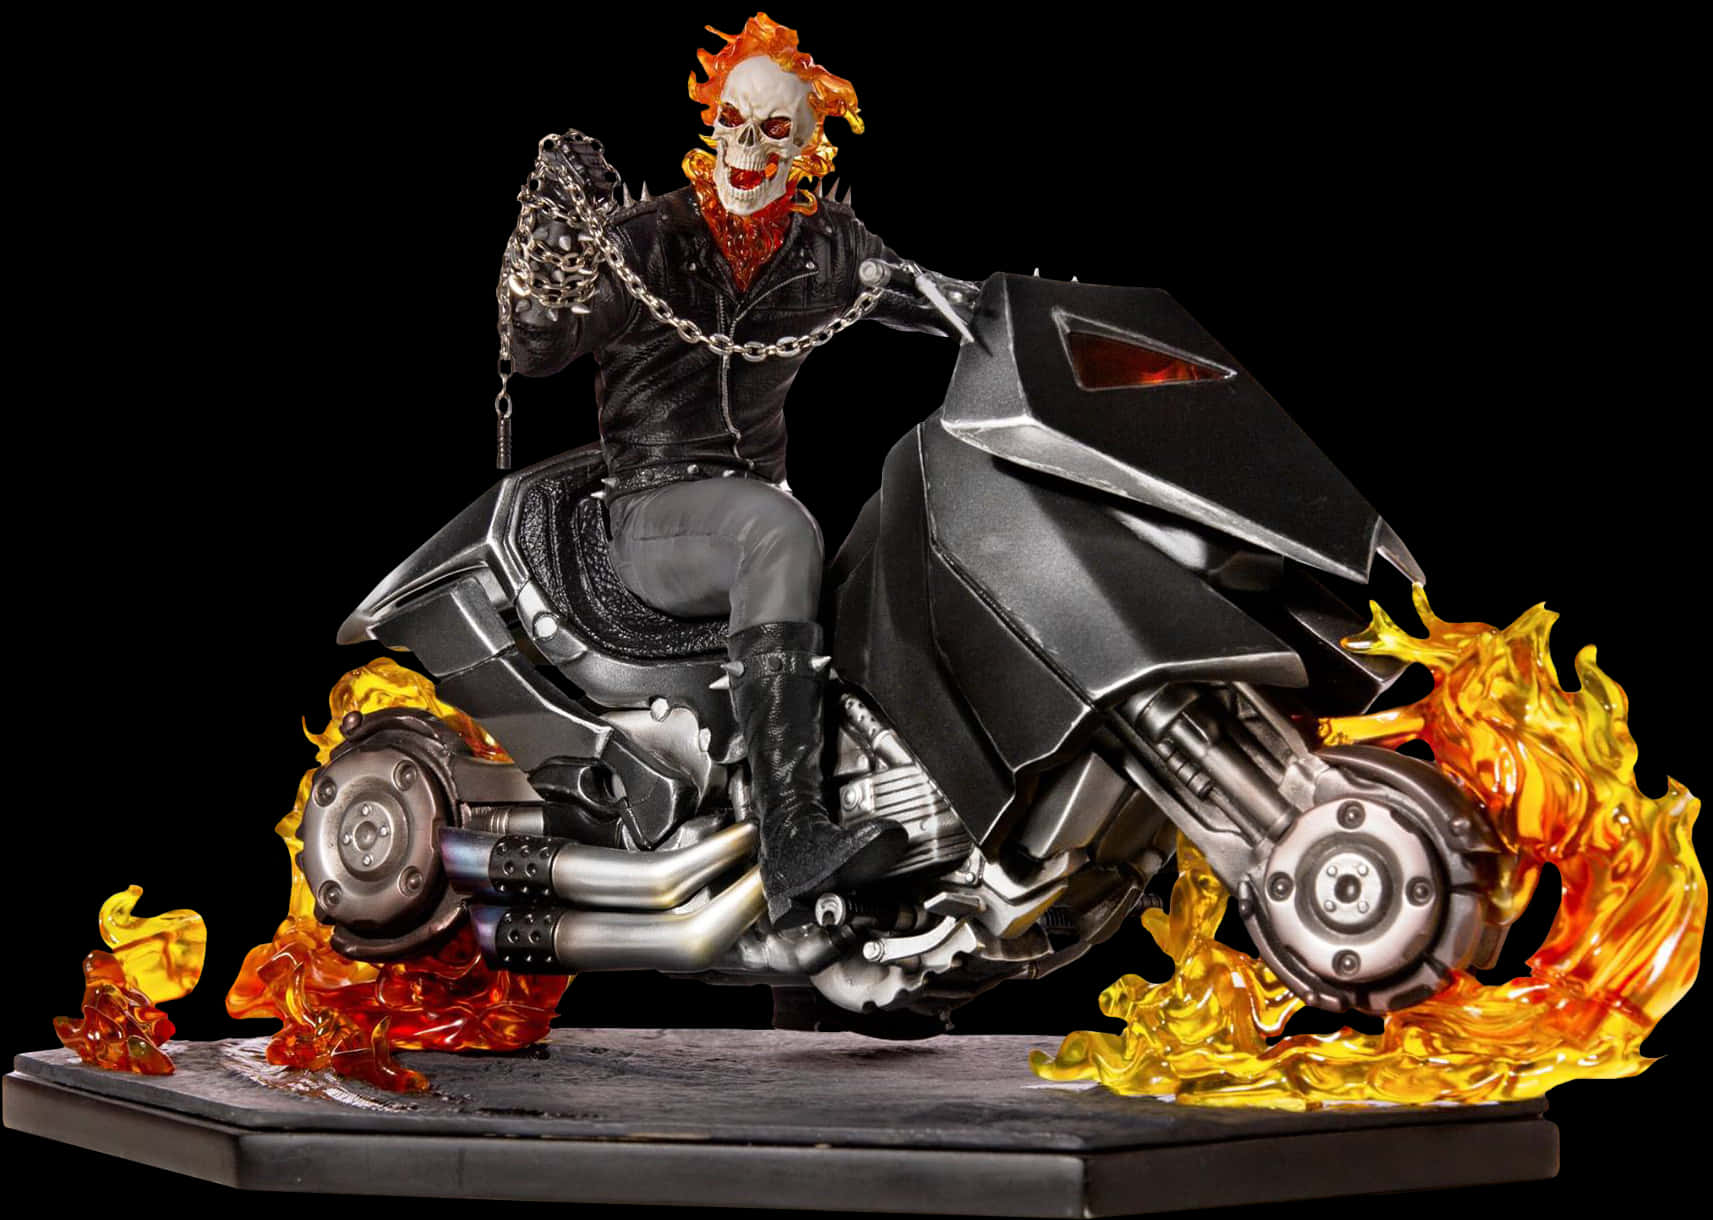 Flaming Motorcycle Ghost Rider Figurine